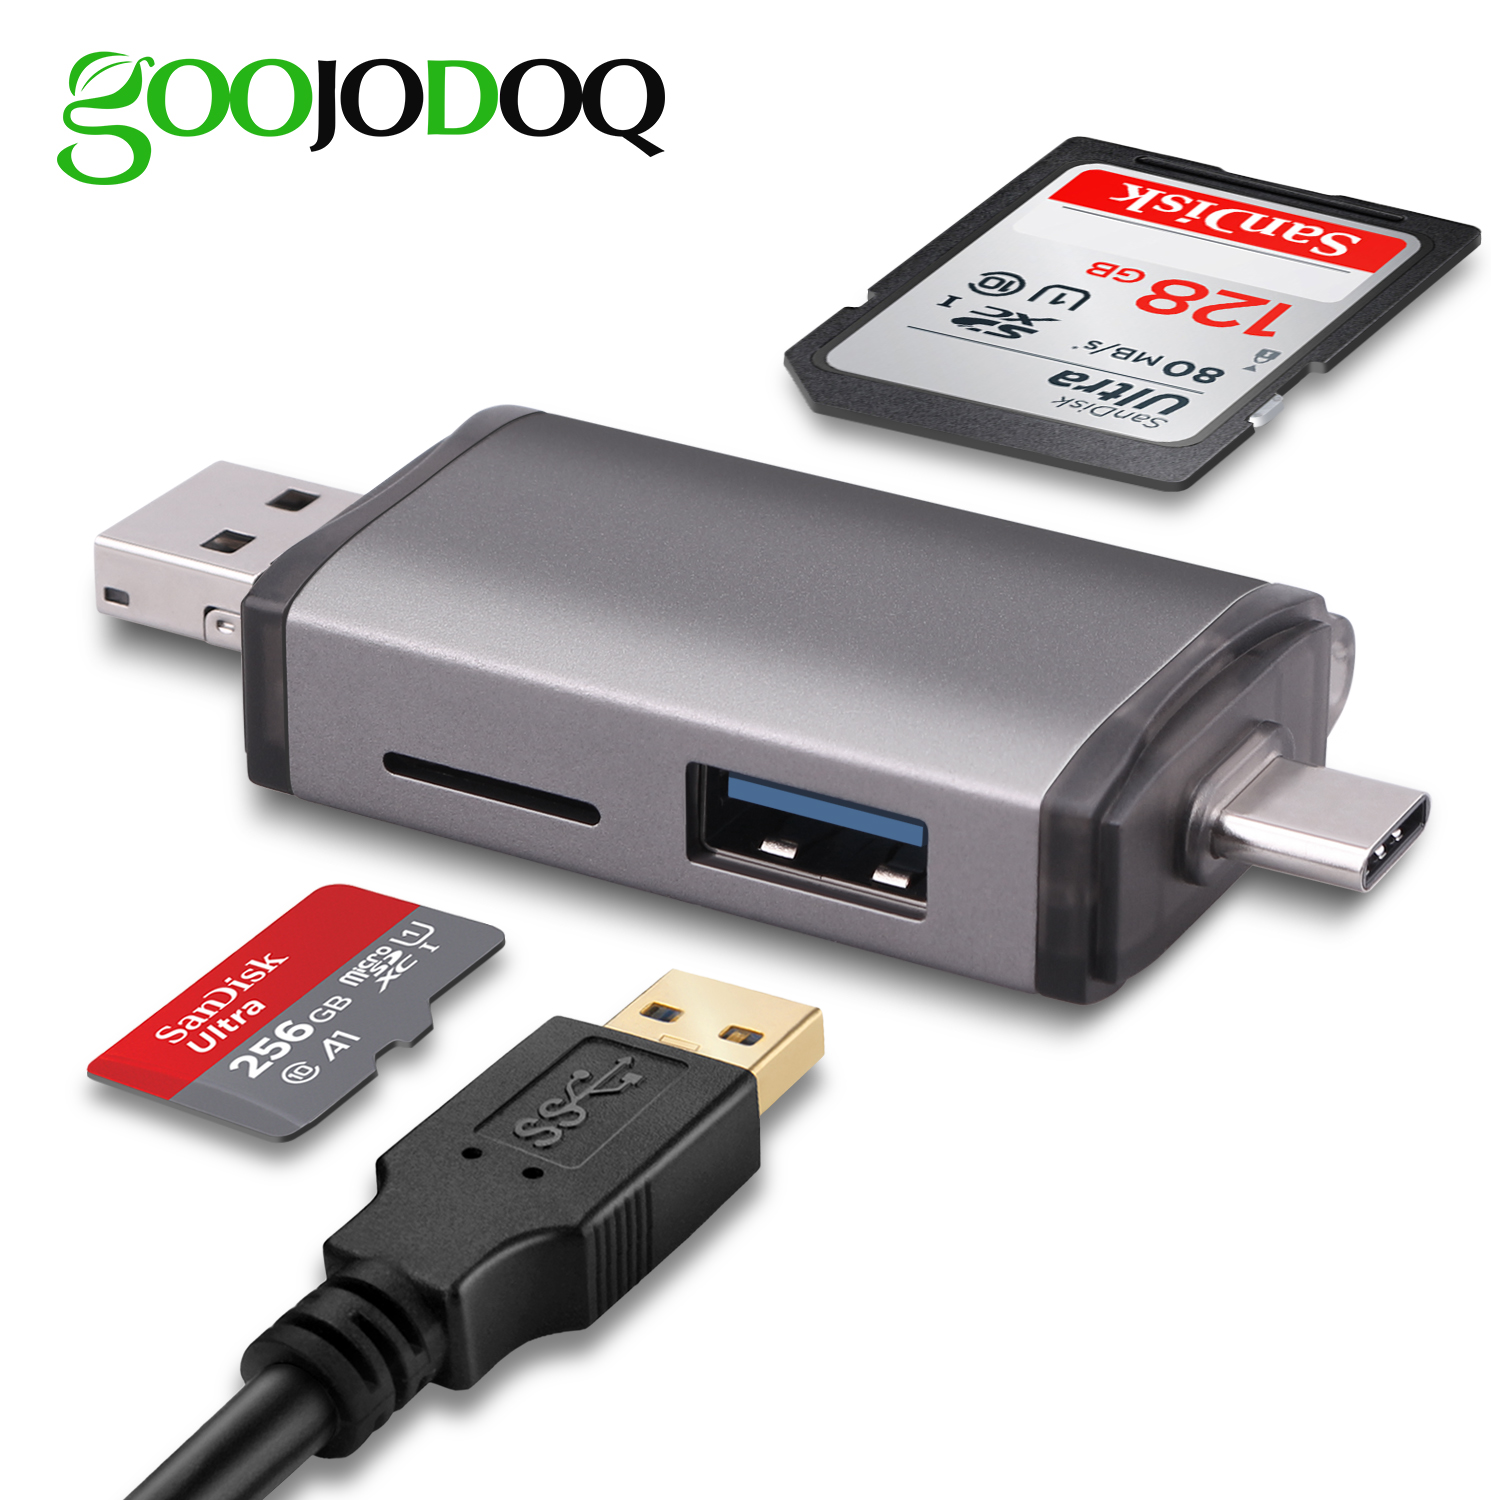 GOOJODOQ T-933 Card Reader Type C USB Micro USB to SD Micro SD TF Adapter Accessories OTG Card Reader Memory SD Card Reader